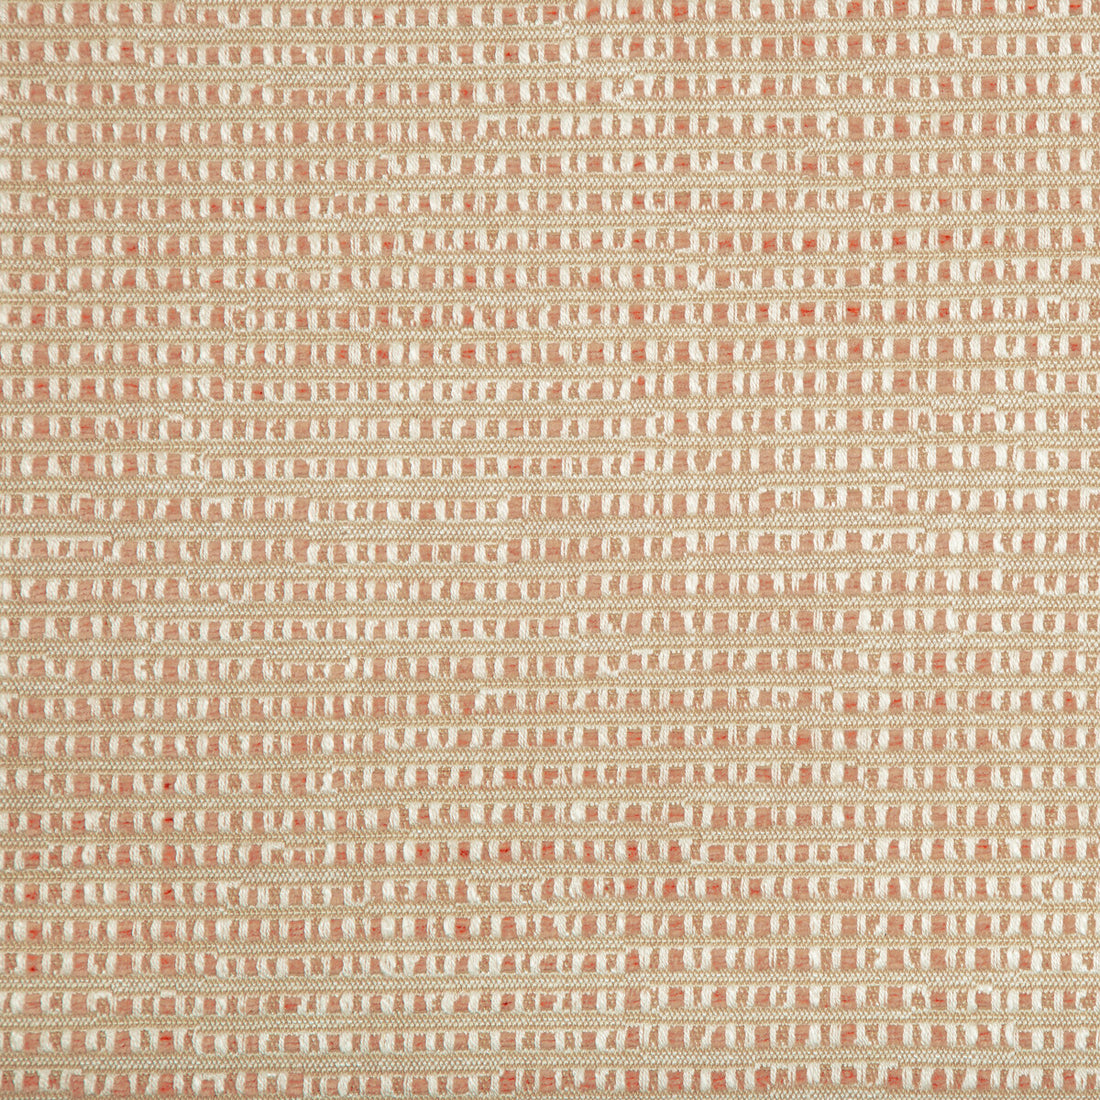 Stissing fabric in faded petal color - pattern 2019156.127.0 - by Lee Jofa in the Carrier And Company collection